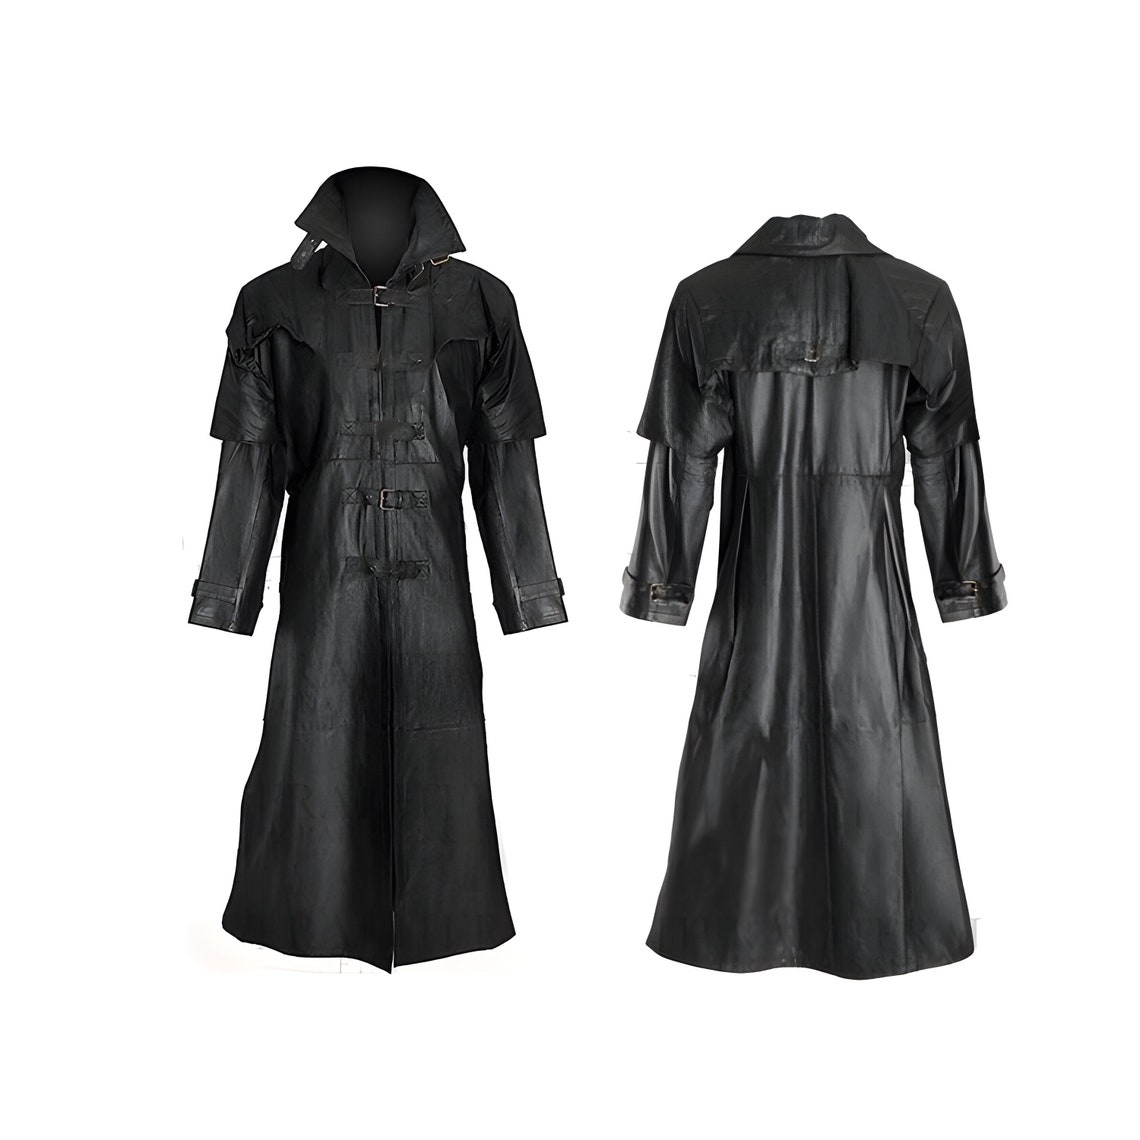 Hugh Jackman Helsing Trench Coat Steampunk Gothic Leather Coat Duster ...